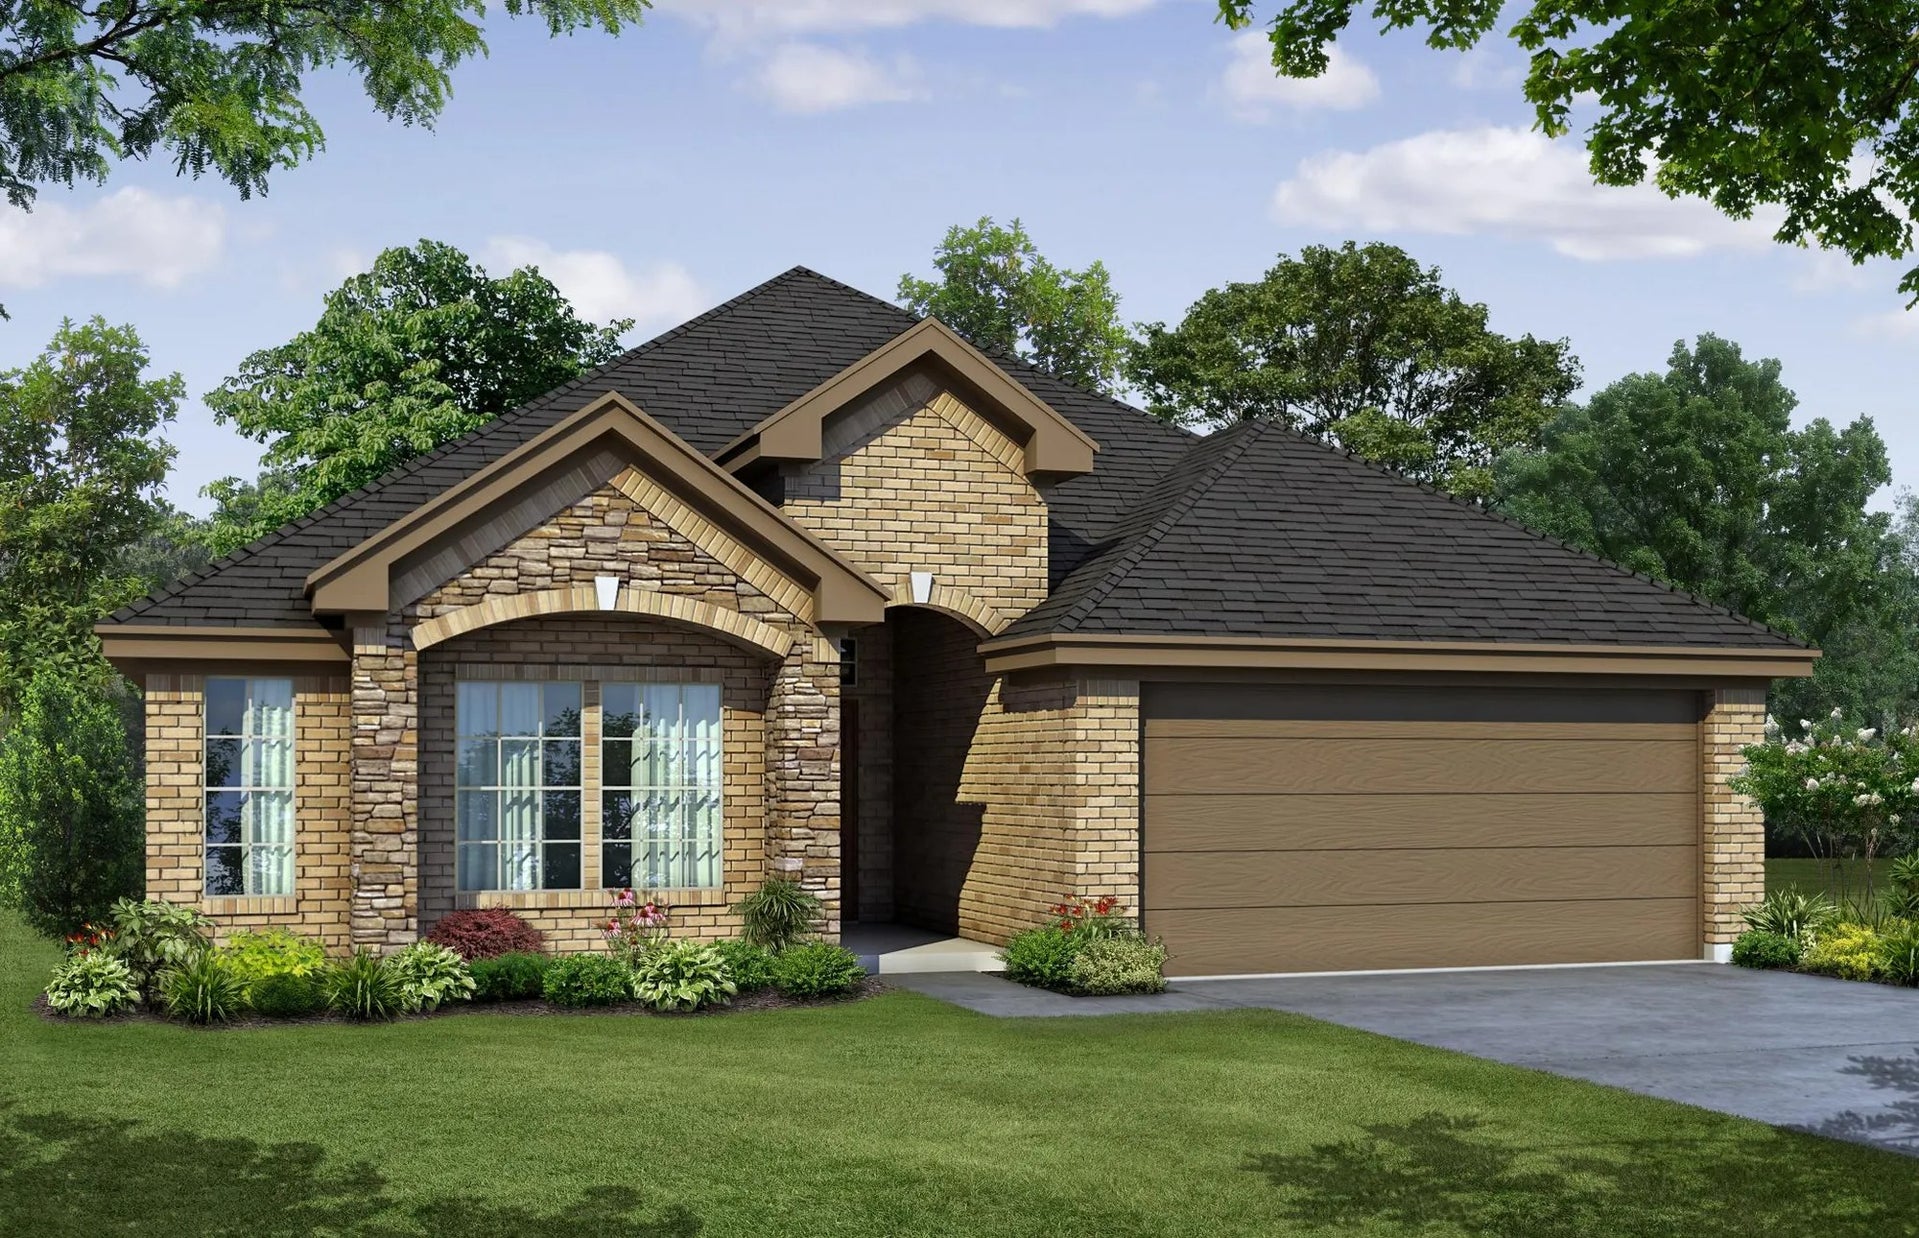 1730 C with Stone. 1,730sf New Home in Joshua, TX